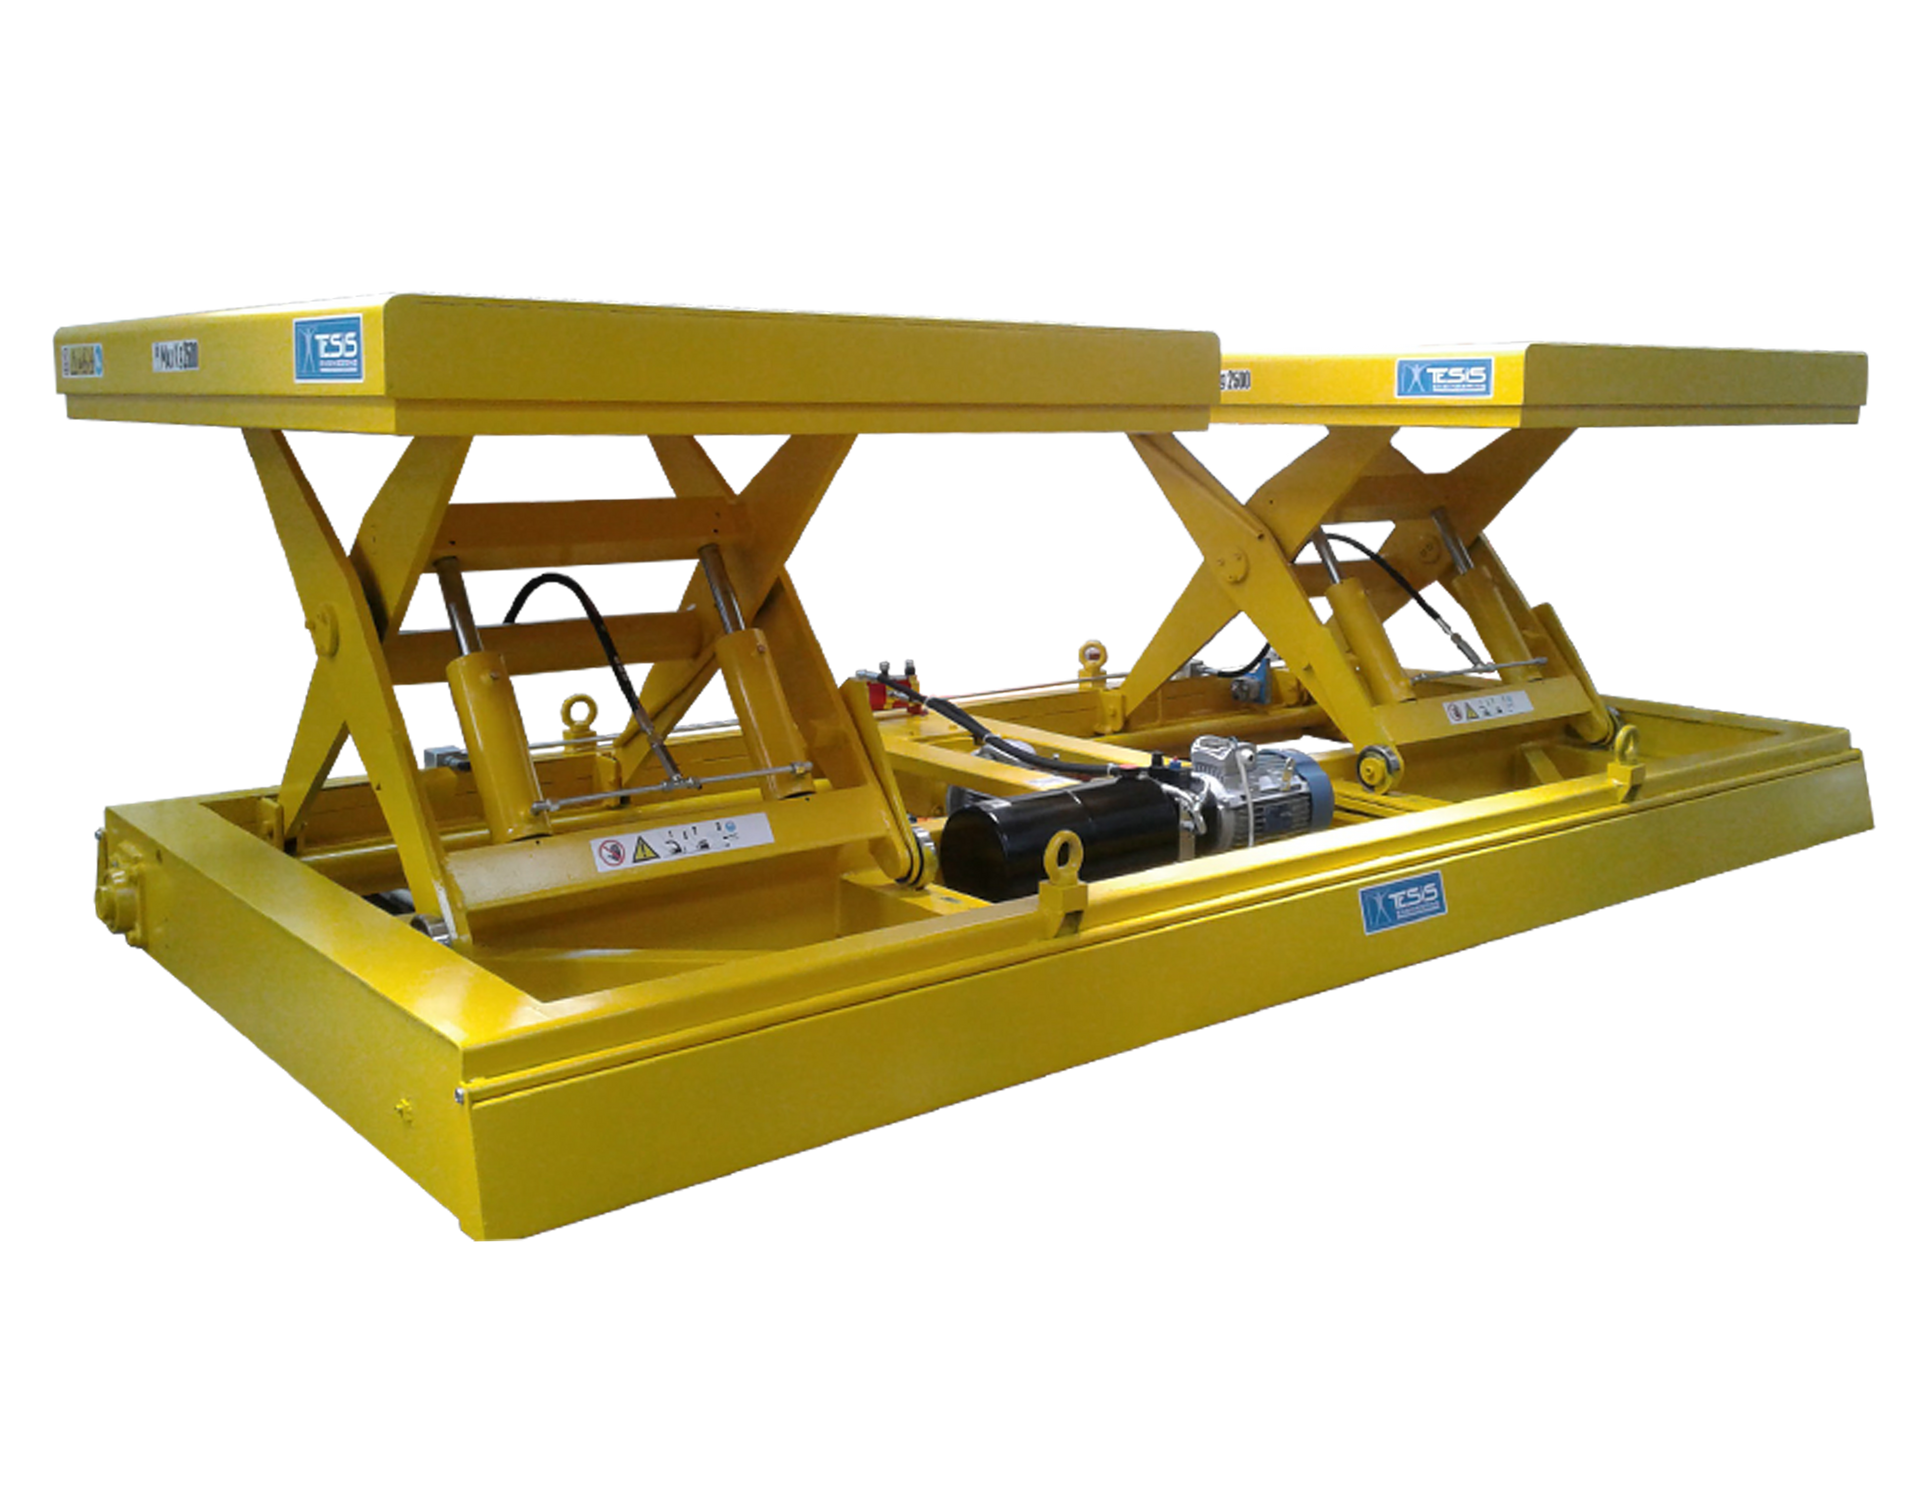 Self-propelled lifting platform with double independent lift tables, customized tandem scissor lift tables, motorized transfer car with double scissor lift